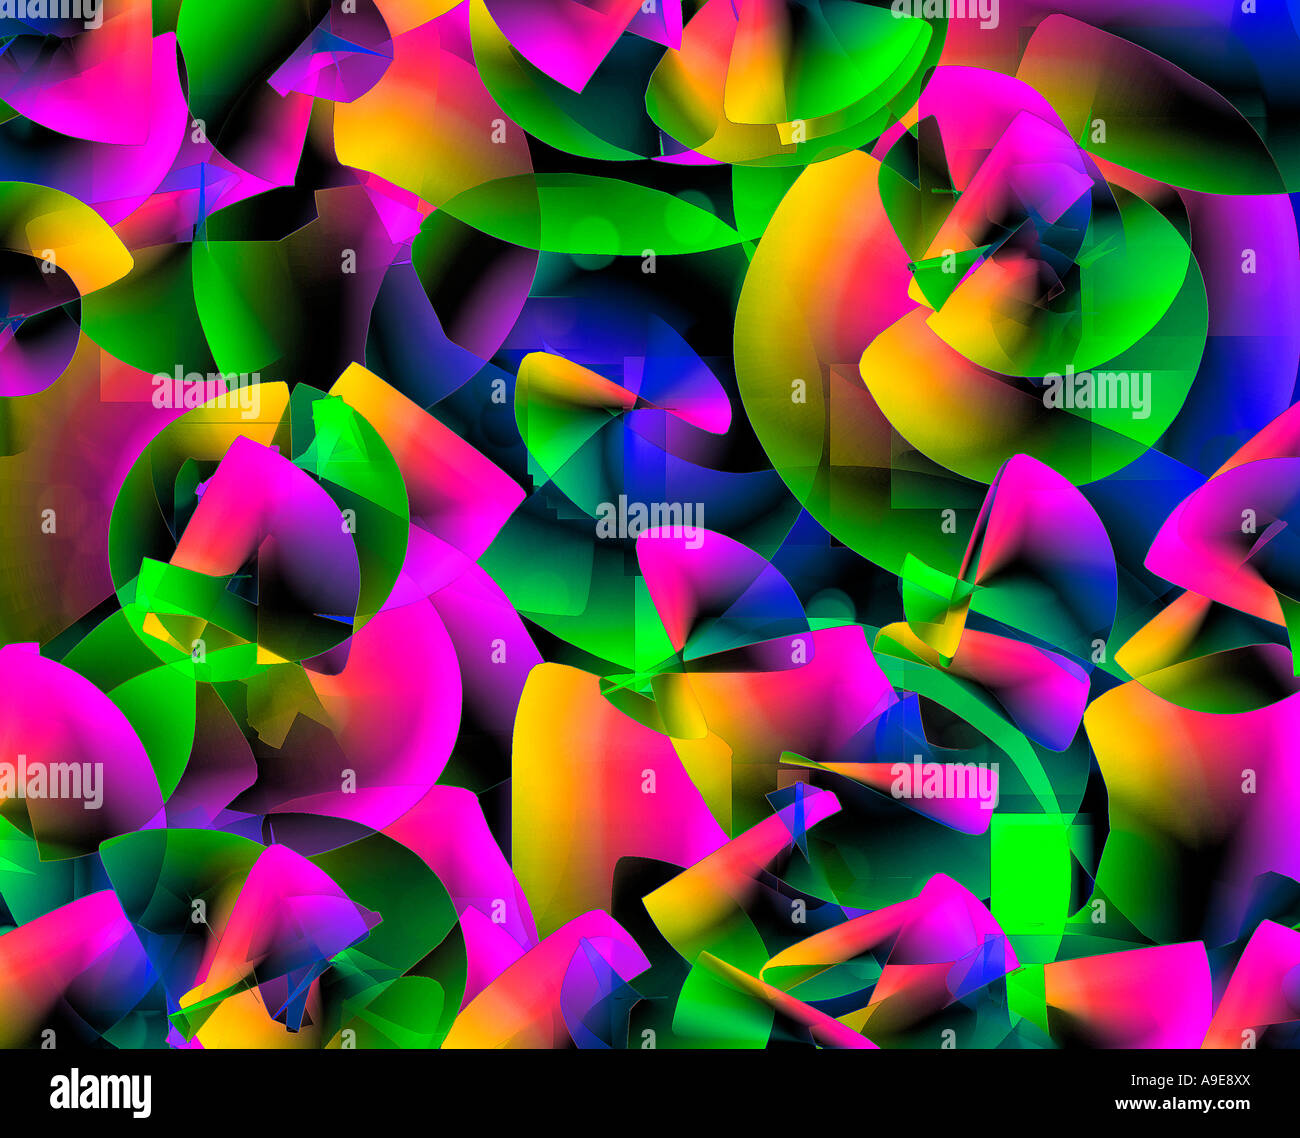 Future scape Is An Abstract Art Image. Stock Photo